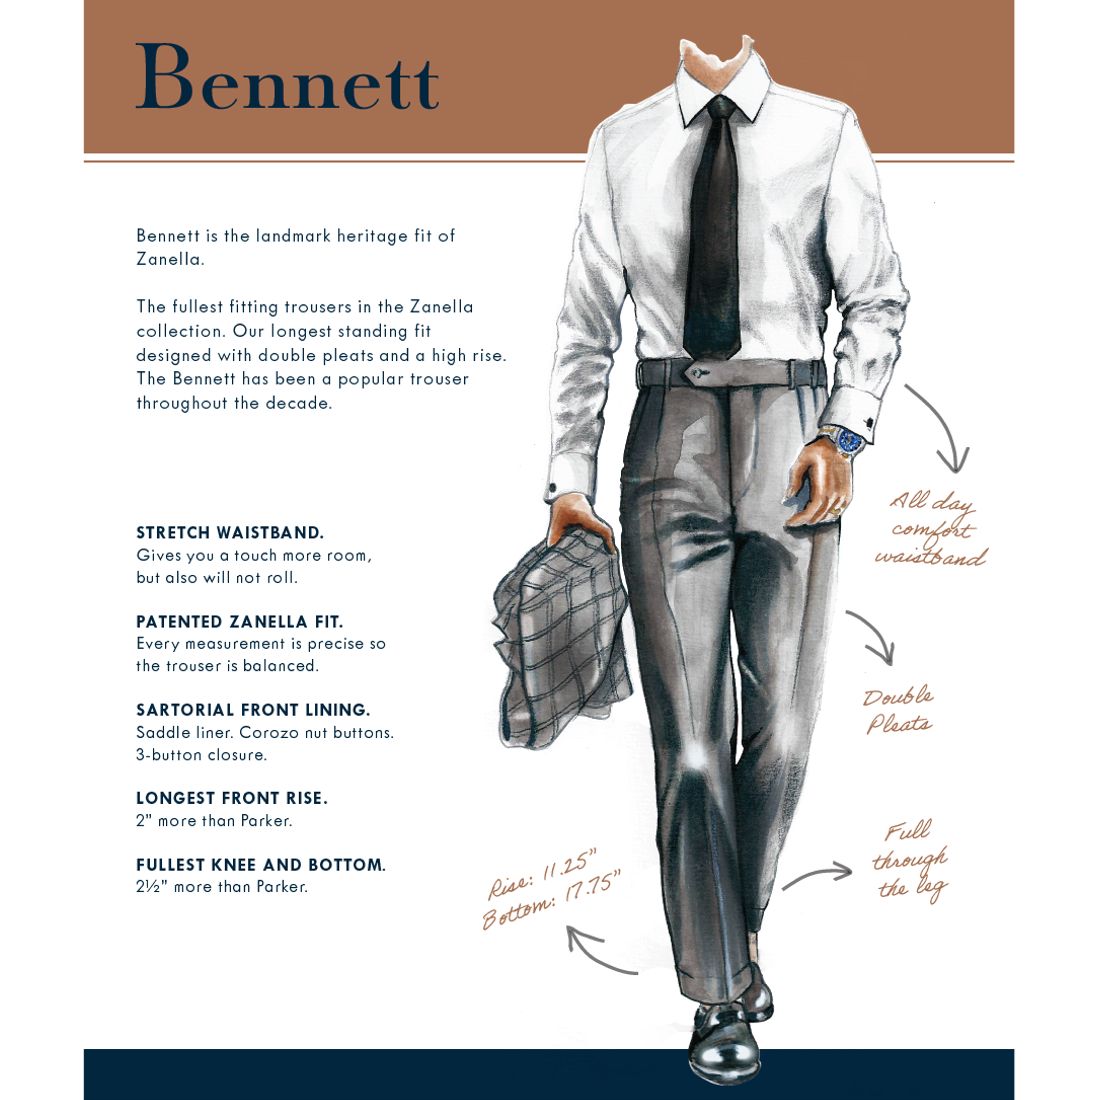 Bennett Double Pleated Super 120s Wool Fancy Trouser in Navy & Brown Crosshatch (Full Fit) - LIMITED EDITION by Zanella